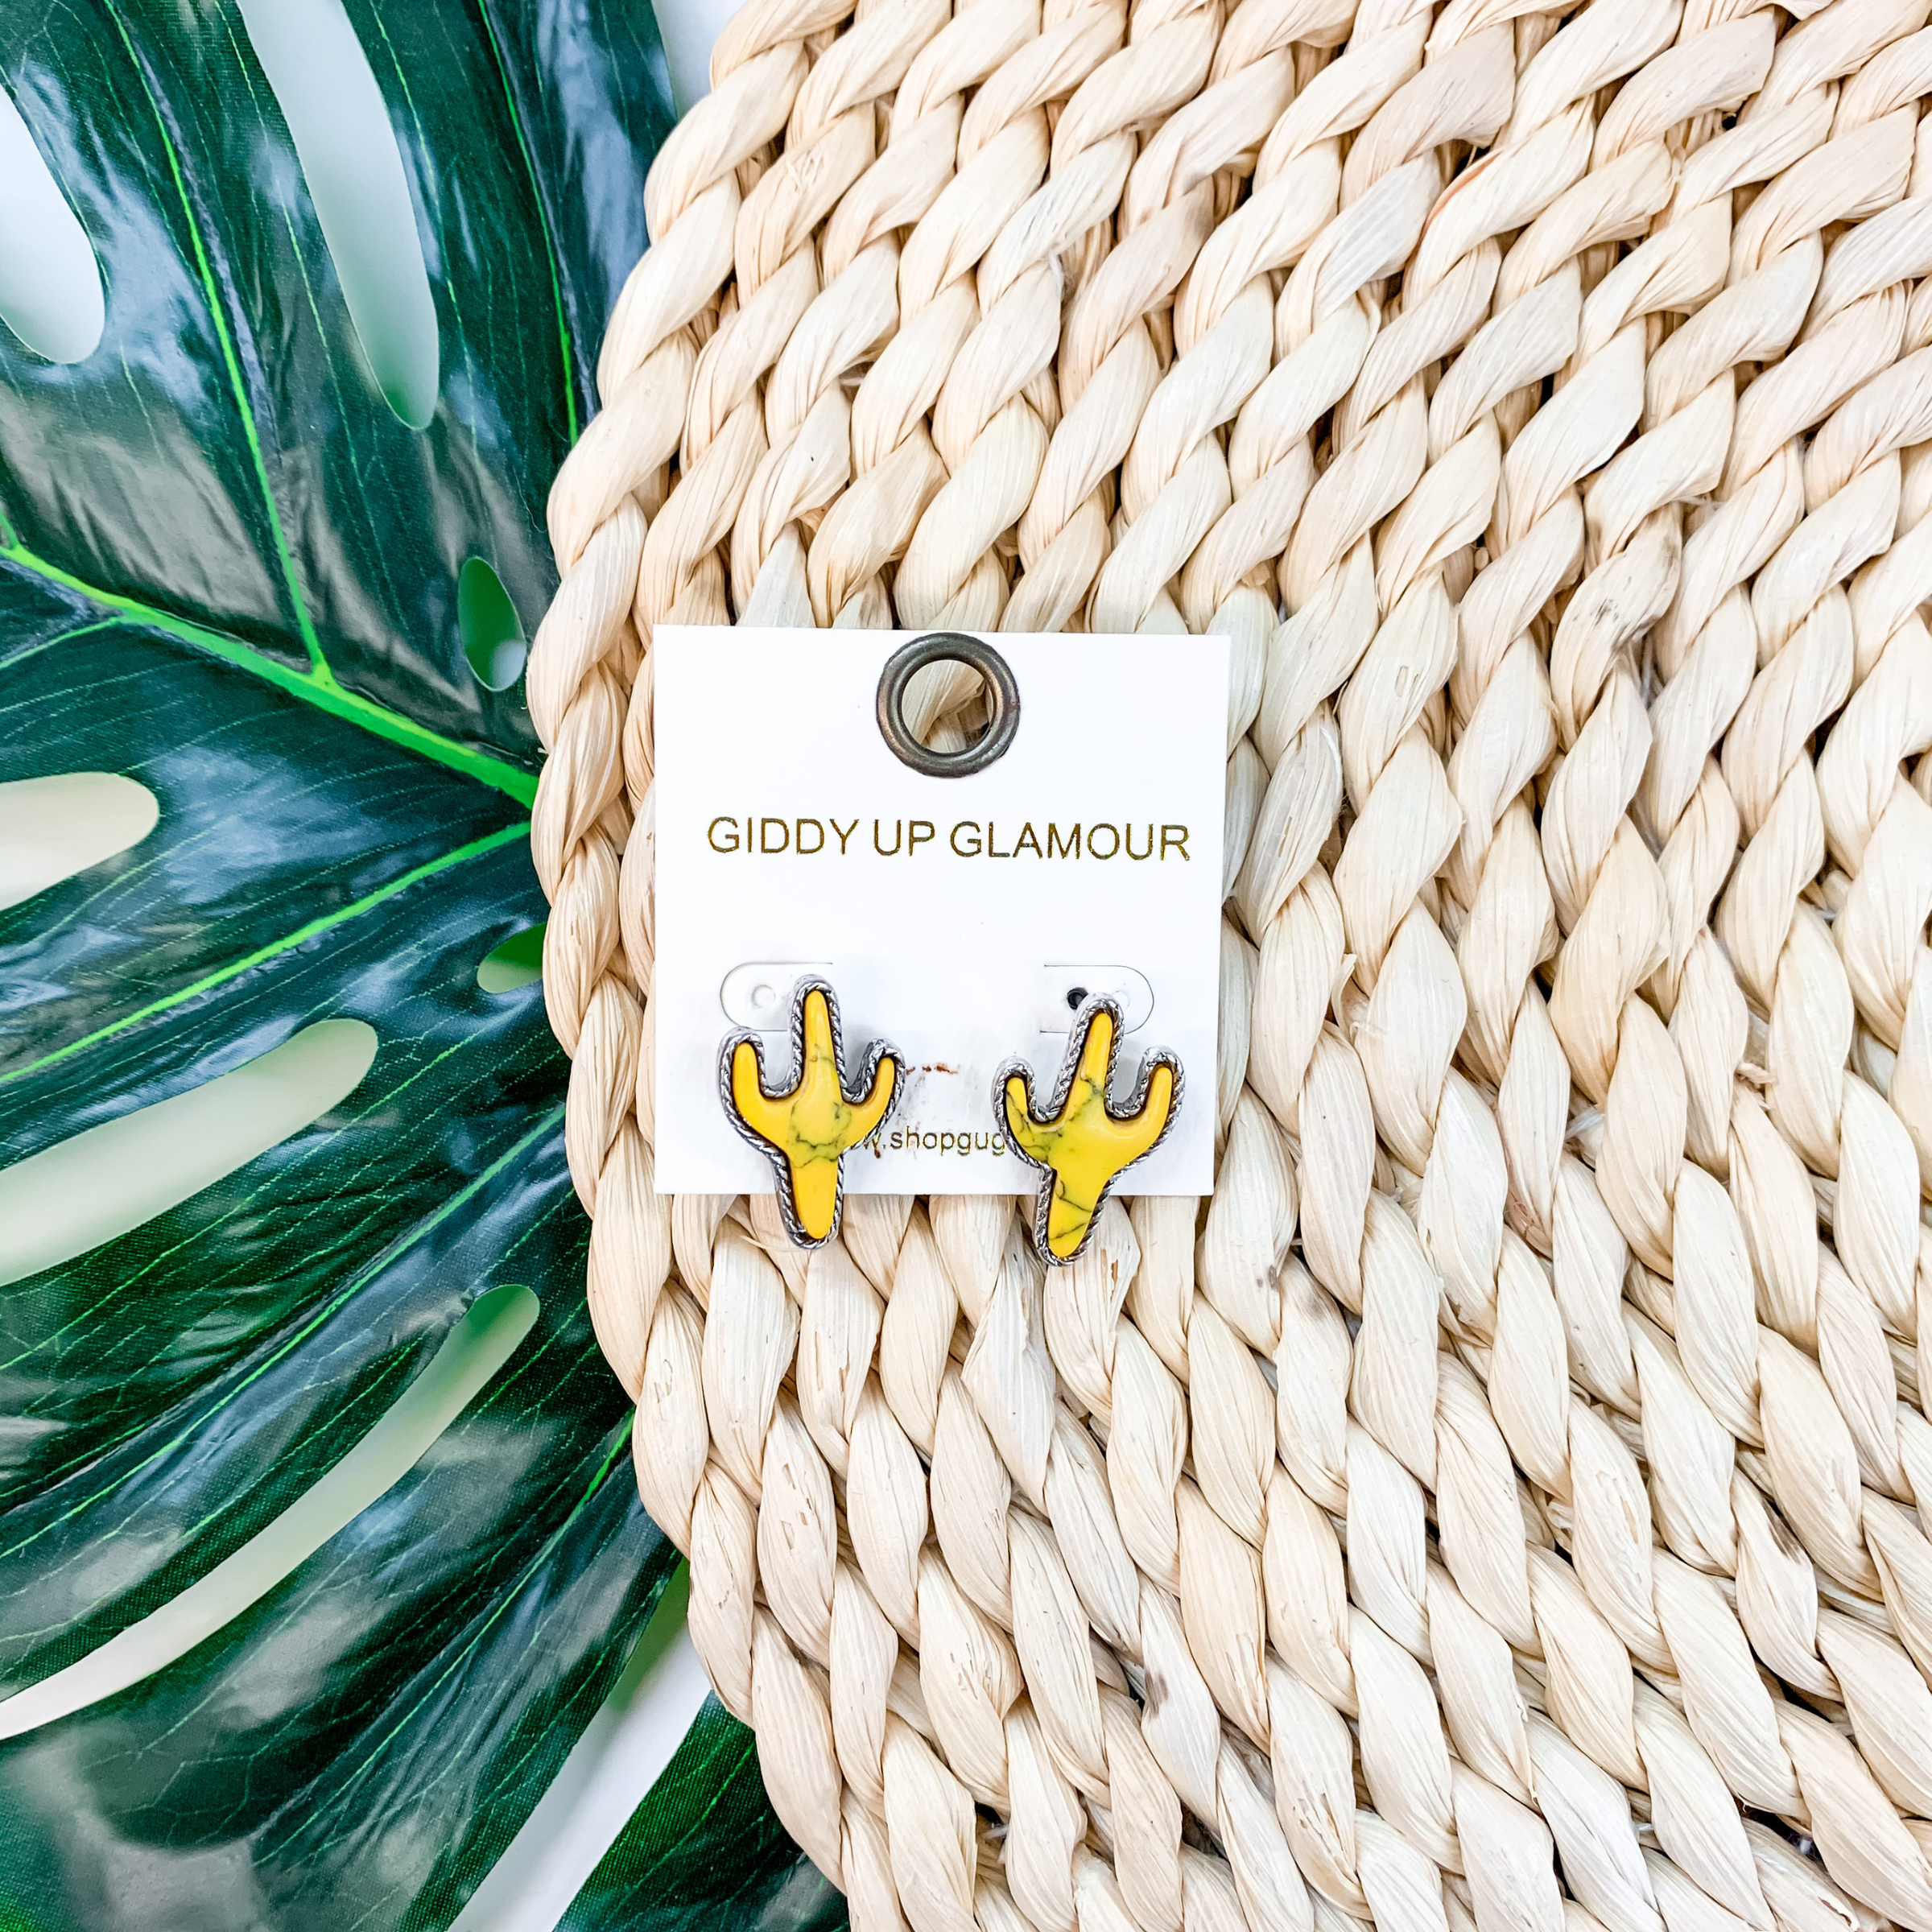 Desert Dreamin' Cactus Stud Earrings in Mustard Yellow - Giddy Up Glamour Boutique